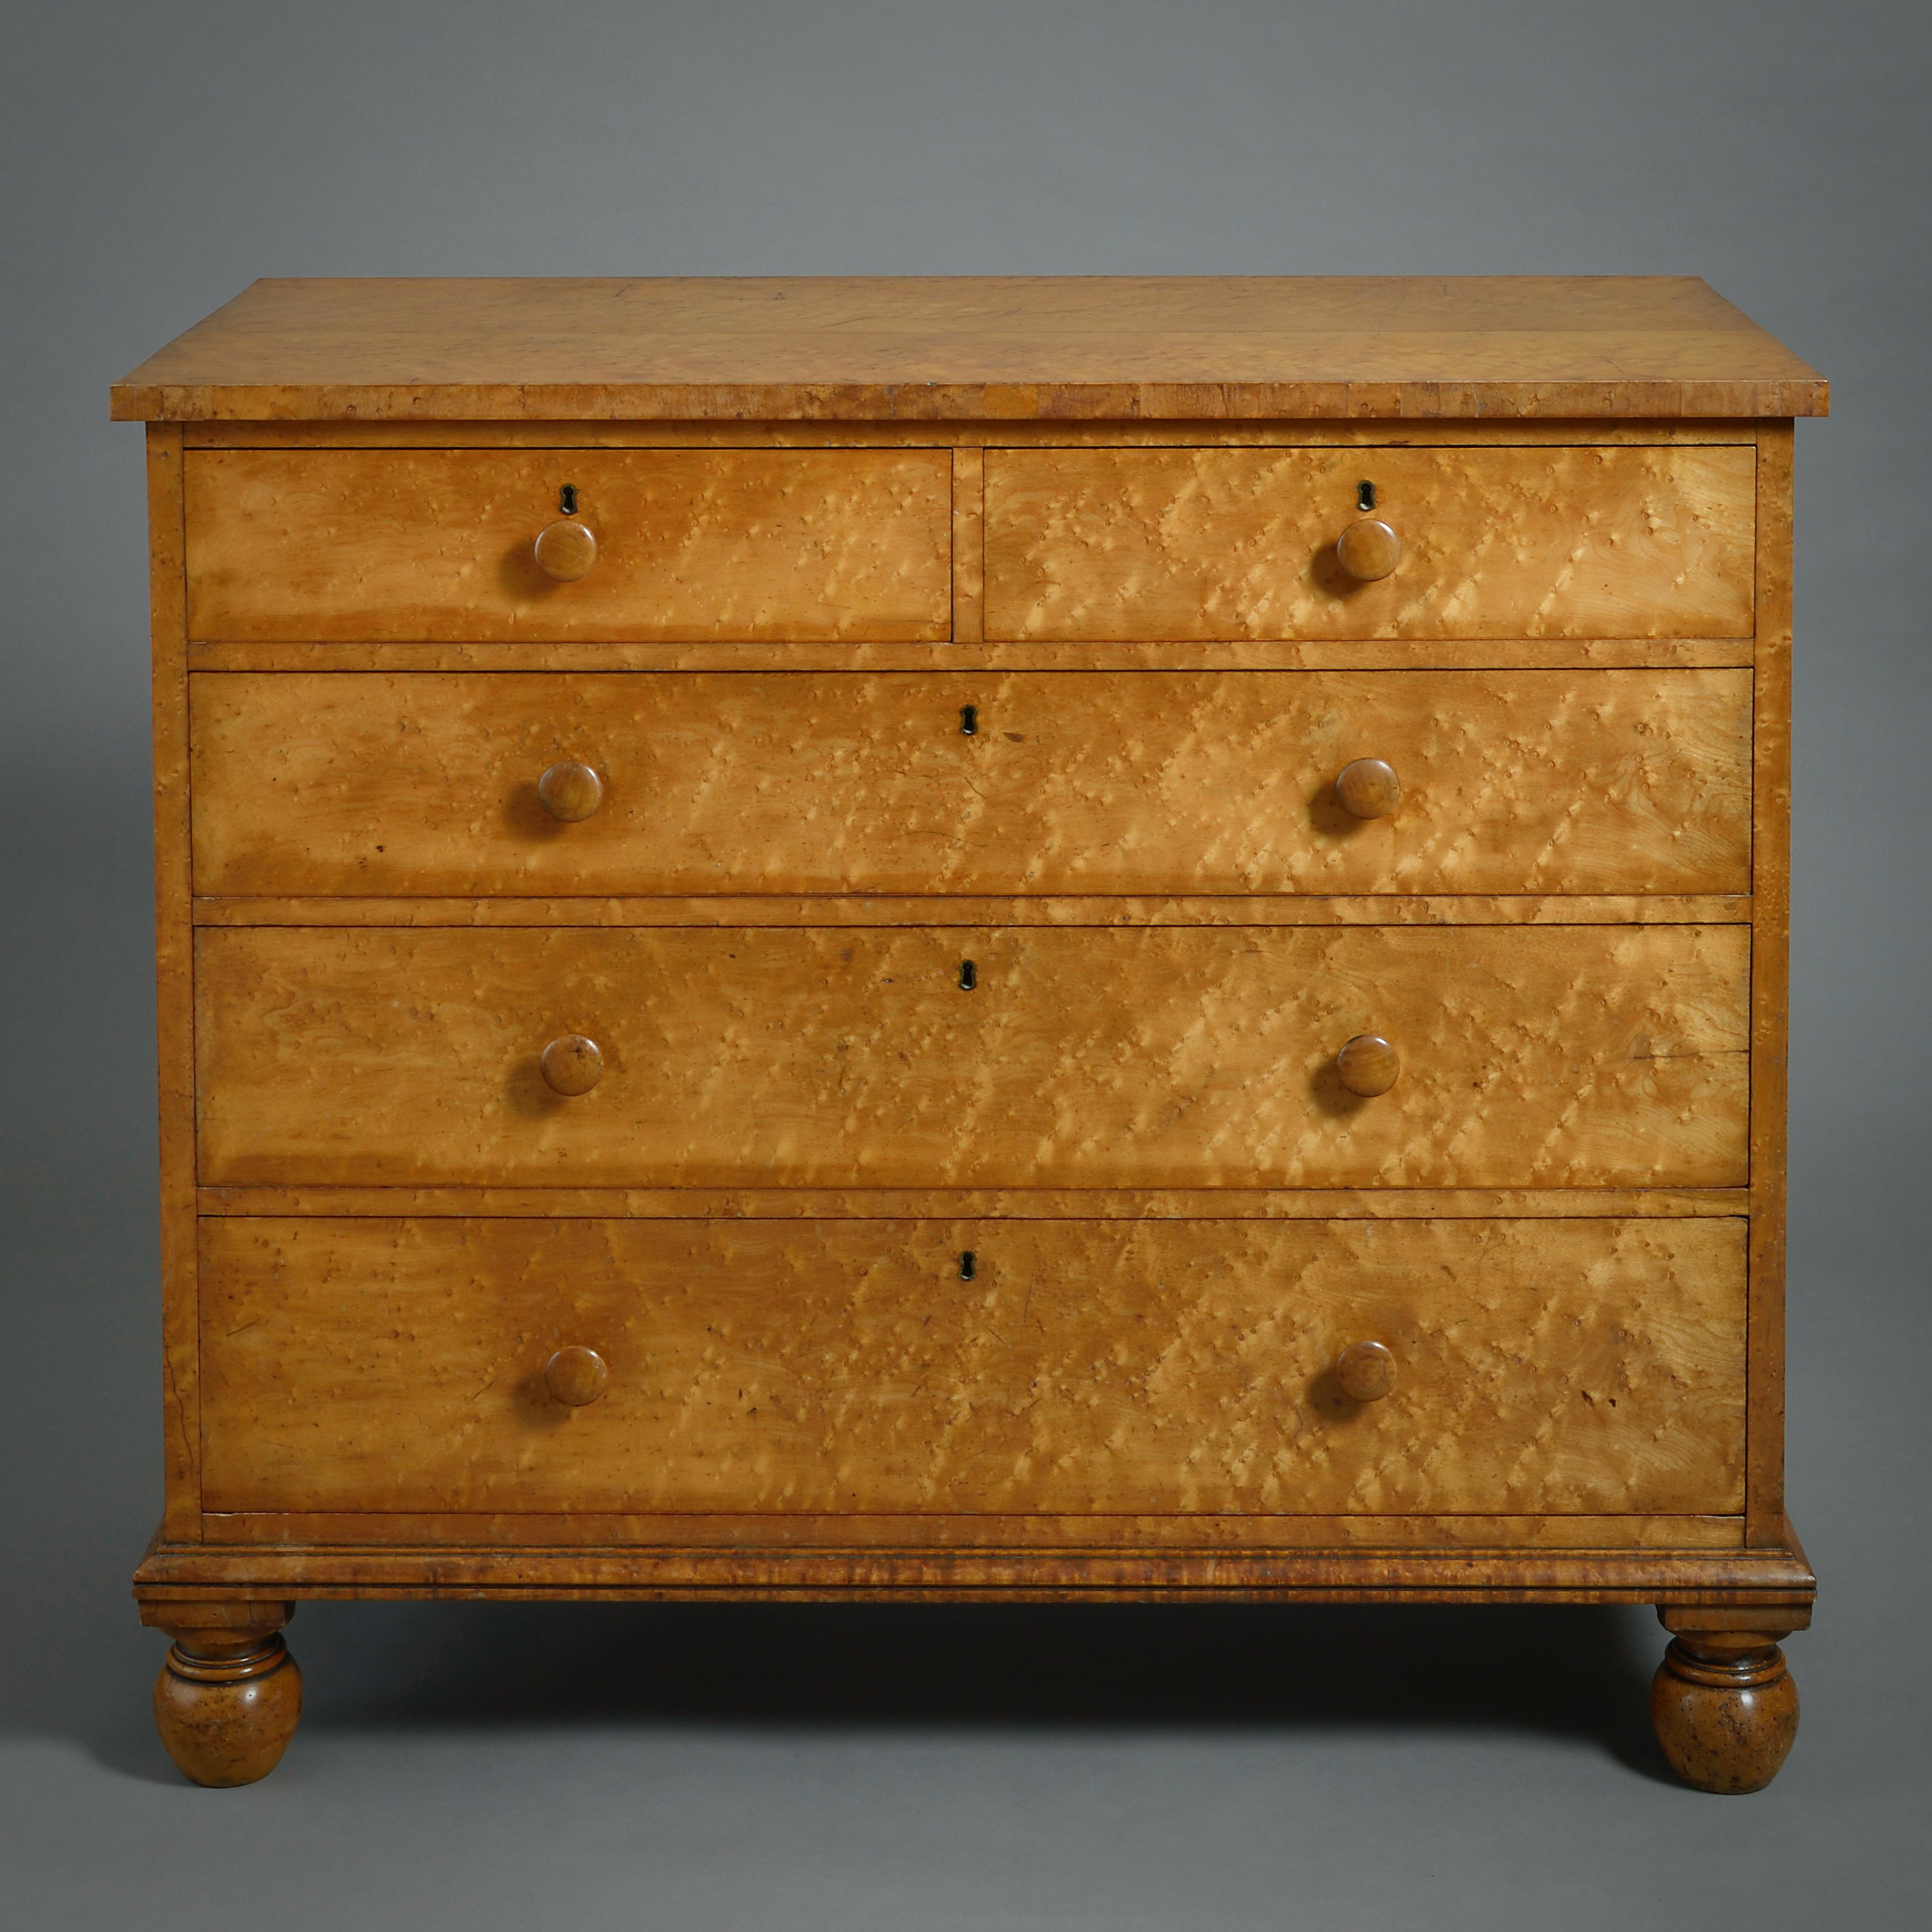 A FINE REGENCY BURR-MAPLE CHEST OF DRAWERS BY GILLOWS, CIRCA 1820.

With five mahogany-lined drawers. Original handles and locks.